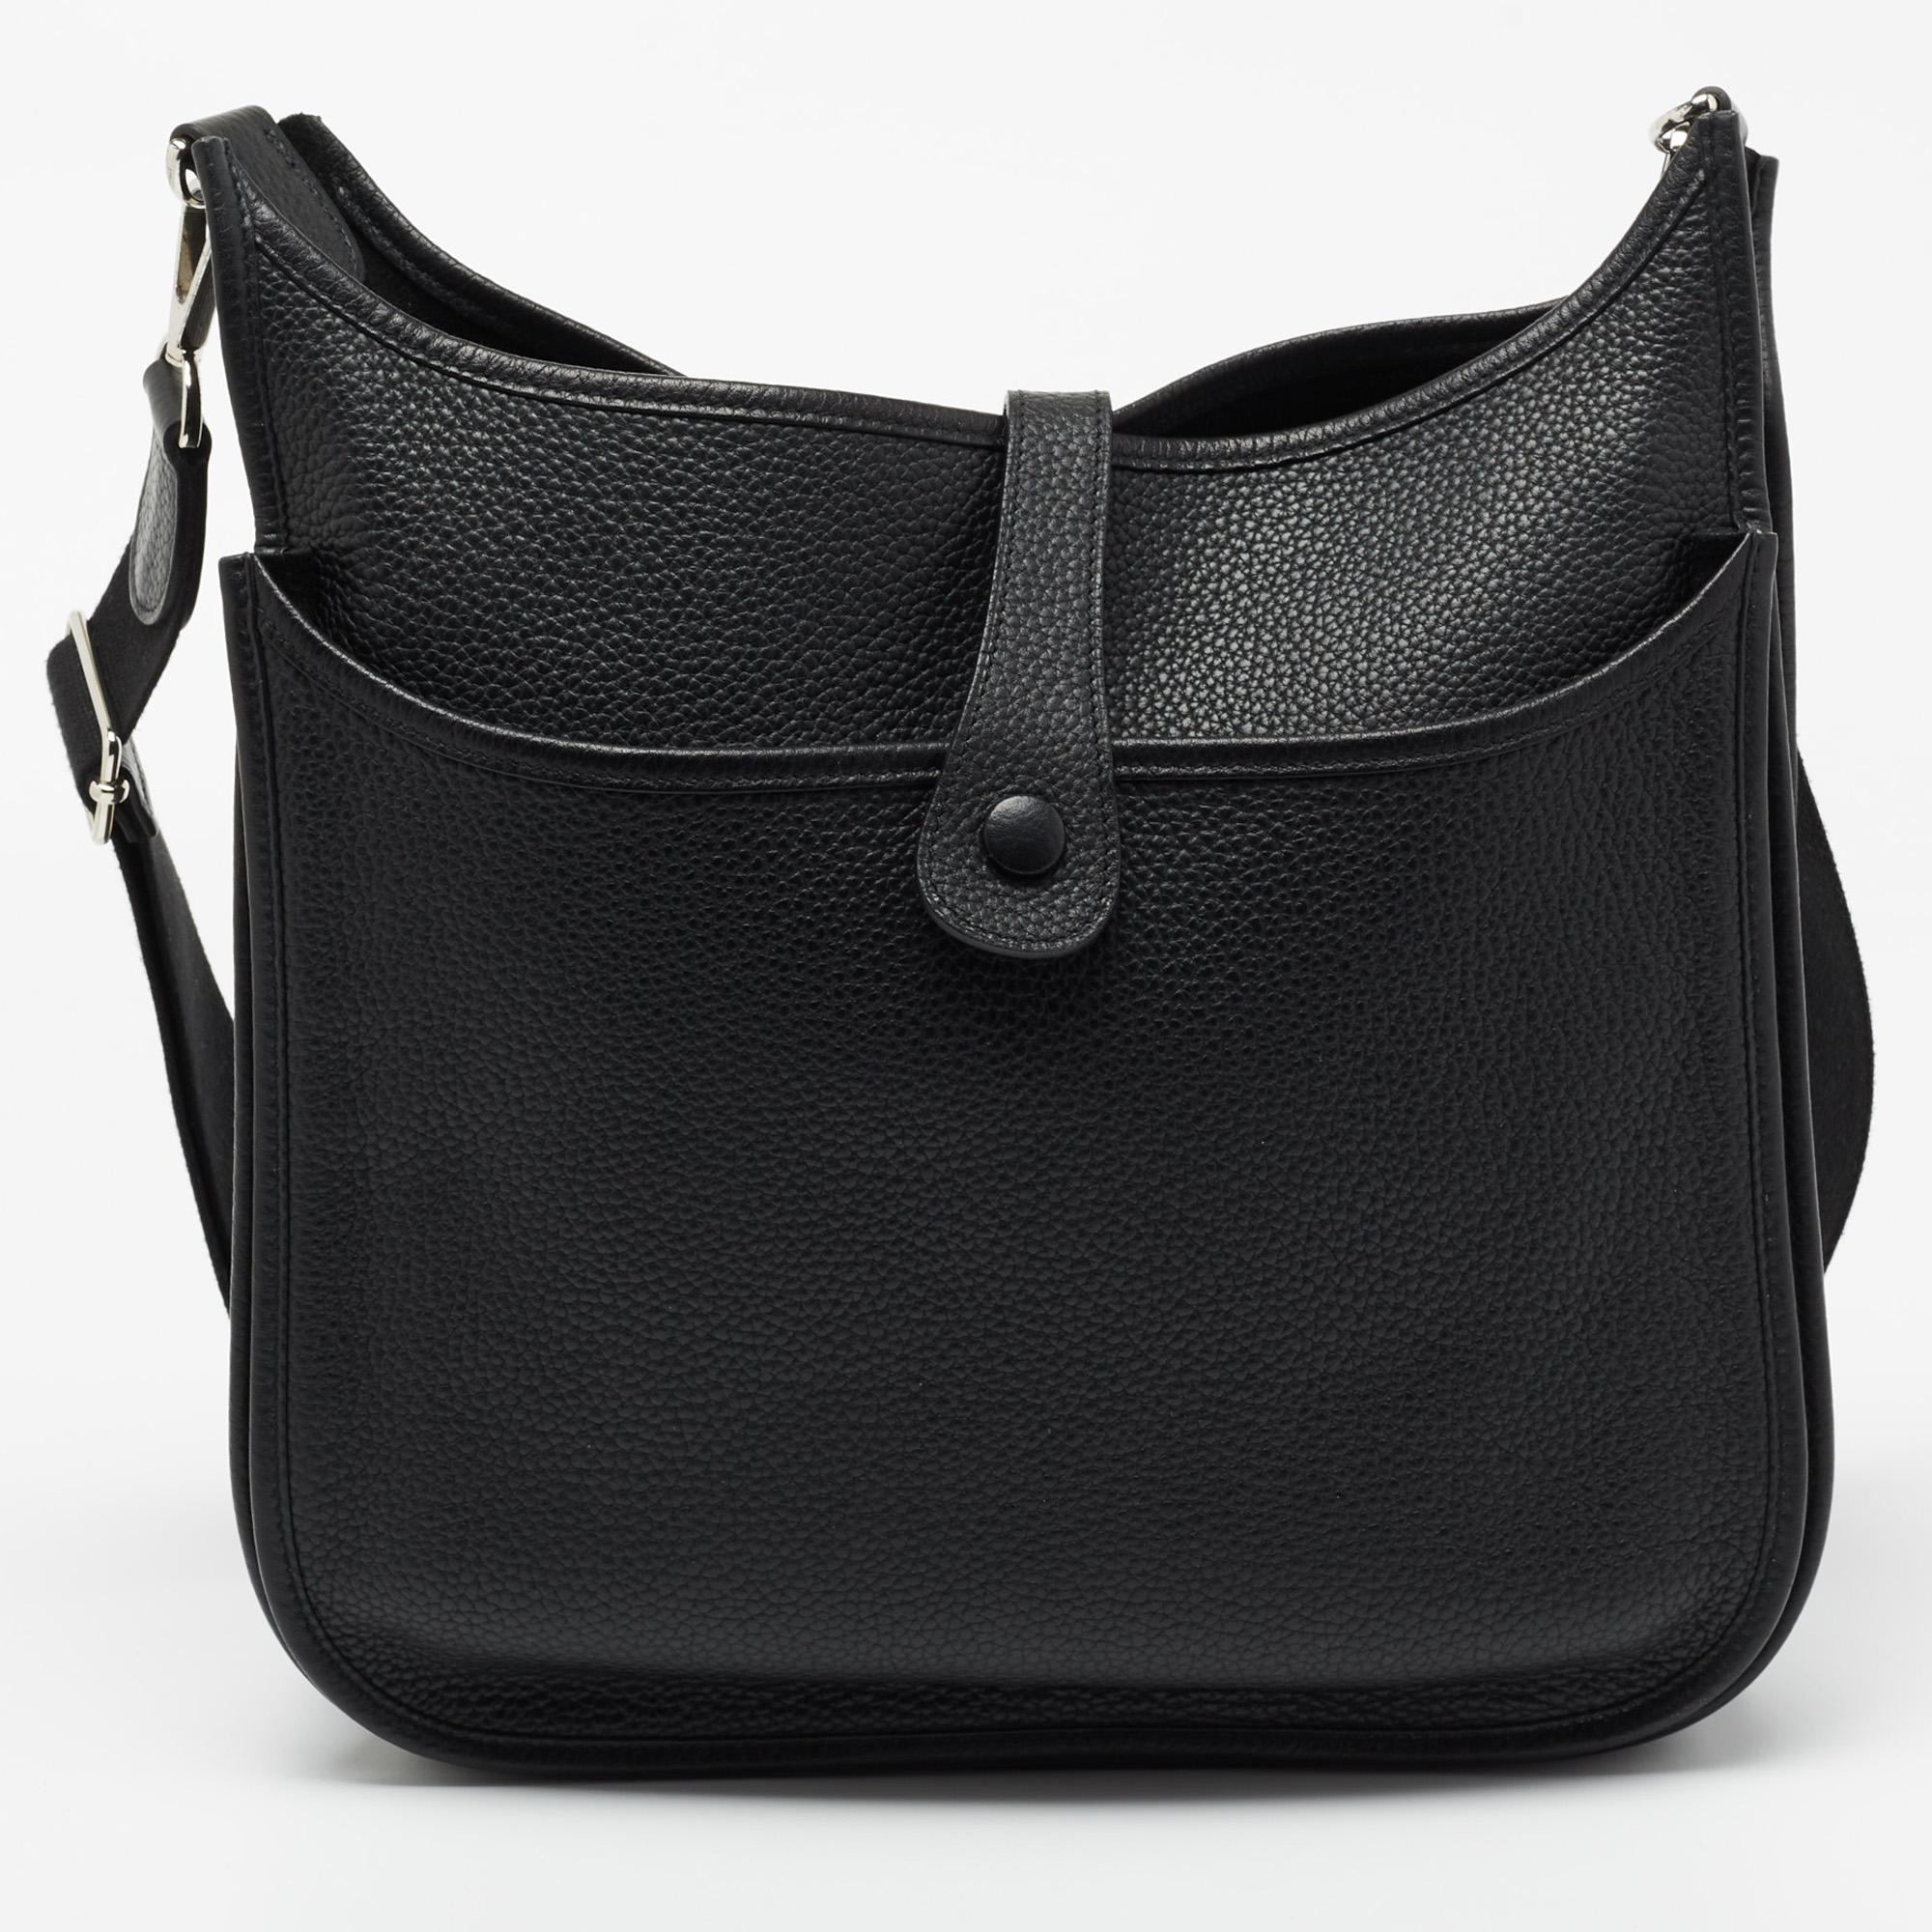 Hermes is a brand that delivers designs with art and creativity, this Evelyne being another proof. Finely crafted from Togo leather in a black shade and featuring an adjustable shoulder strap, this piece is a classic. The bag is spacious enough to